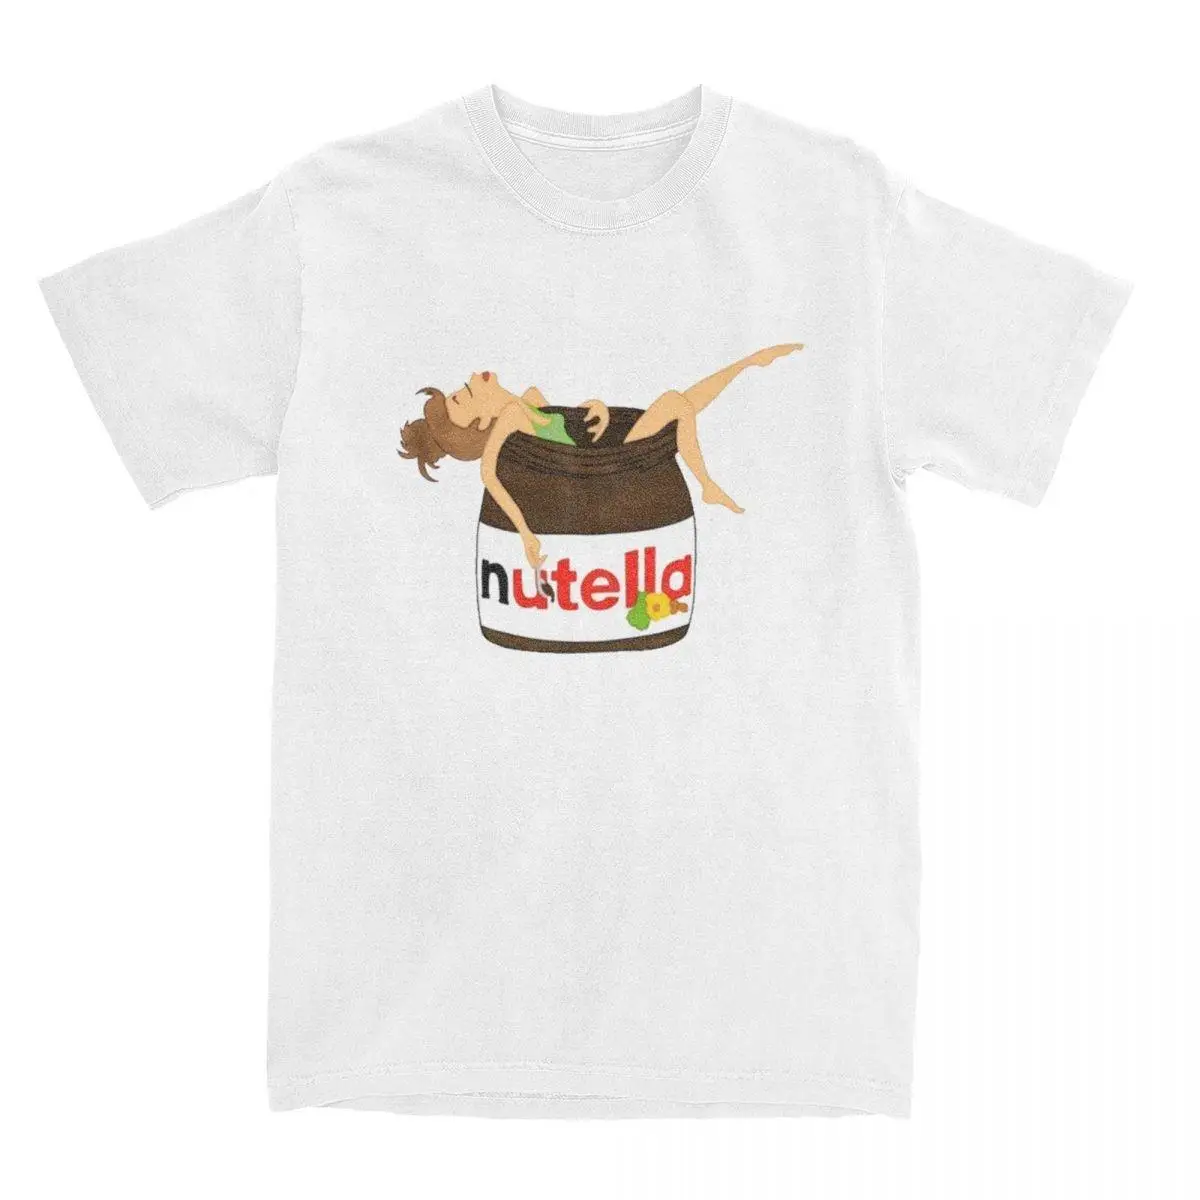 Amazing Nutella Chocolate Lover Yummy T-Shirts for Men O Neck Pure Cotton T Shirt Short Sleeve Tees Birthday Gift Clothes